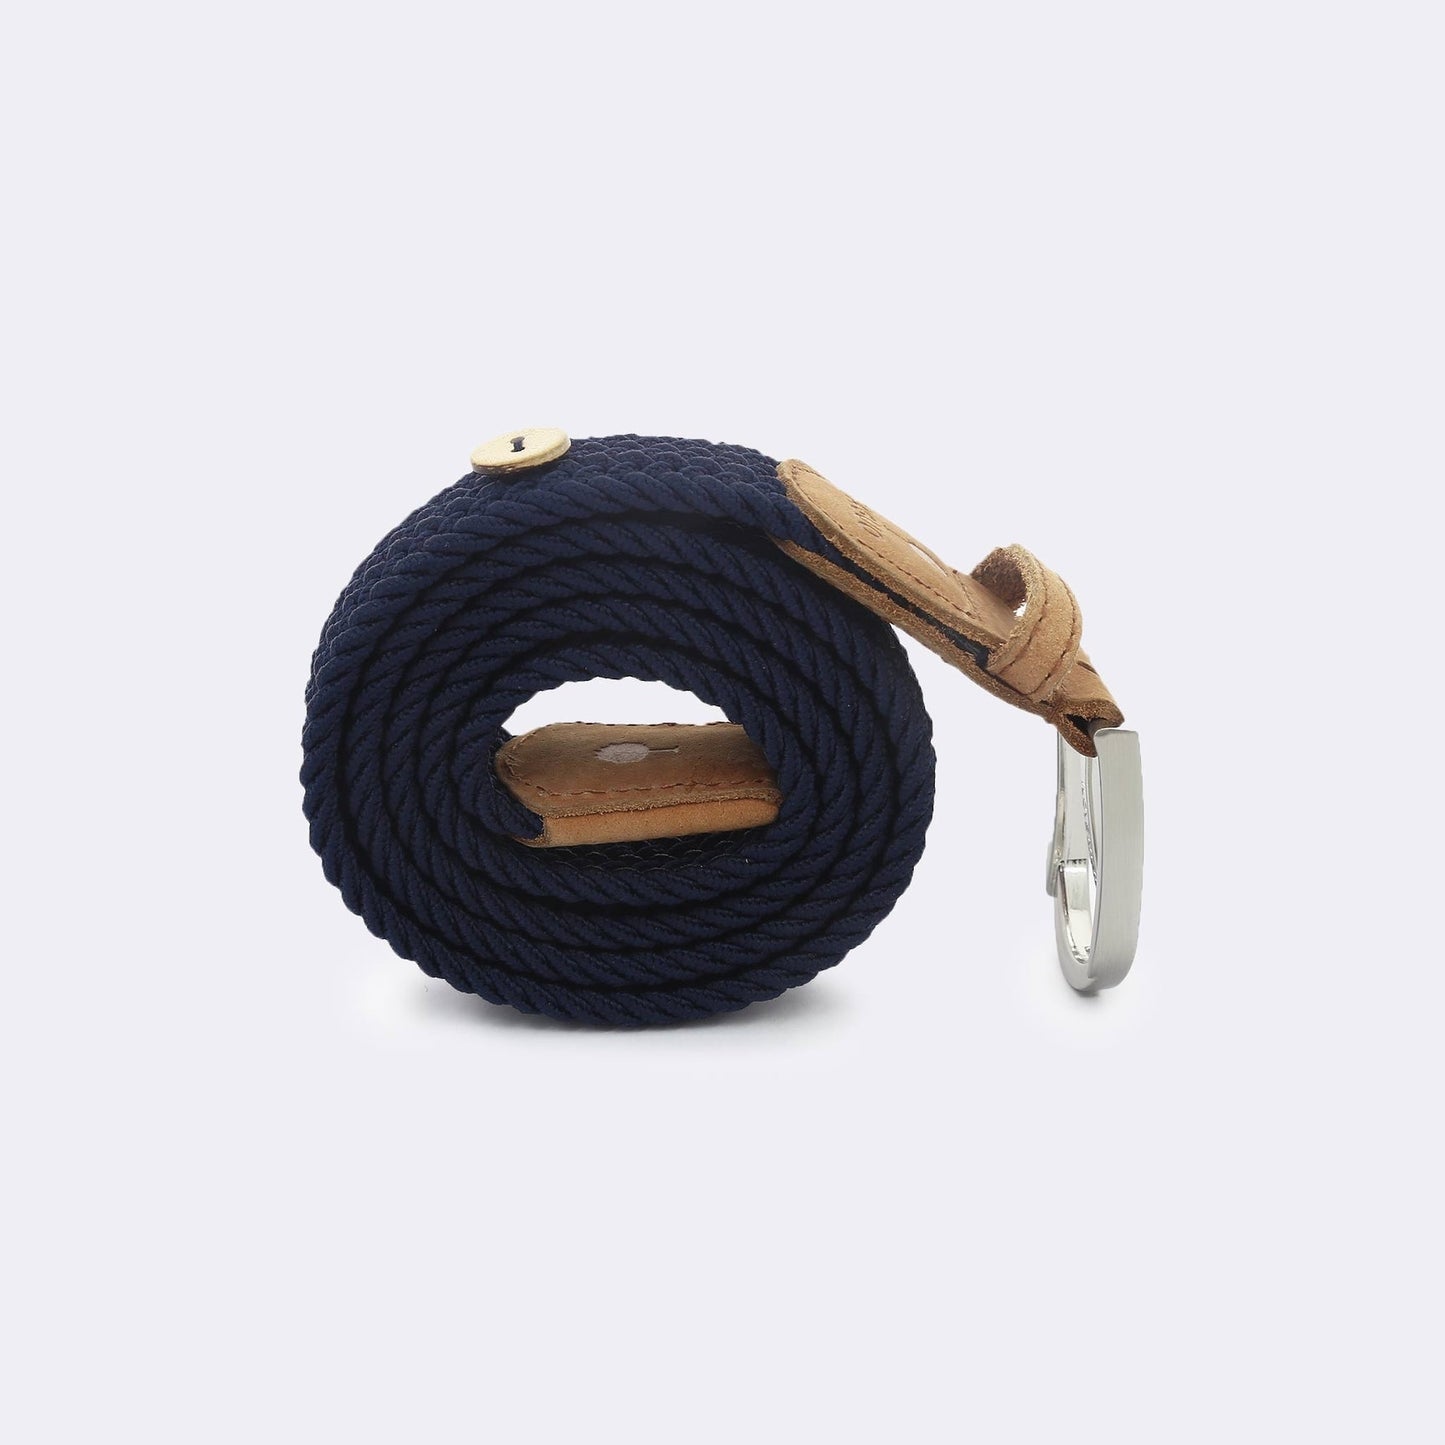 Navy belt in recycled polyester